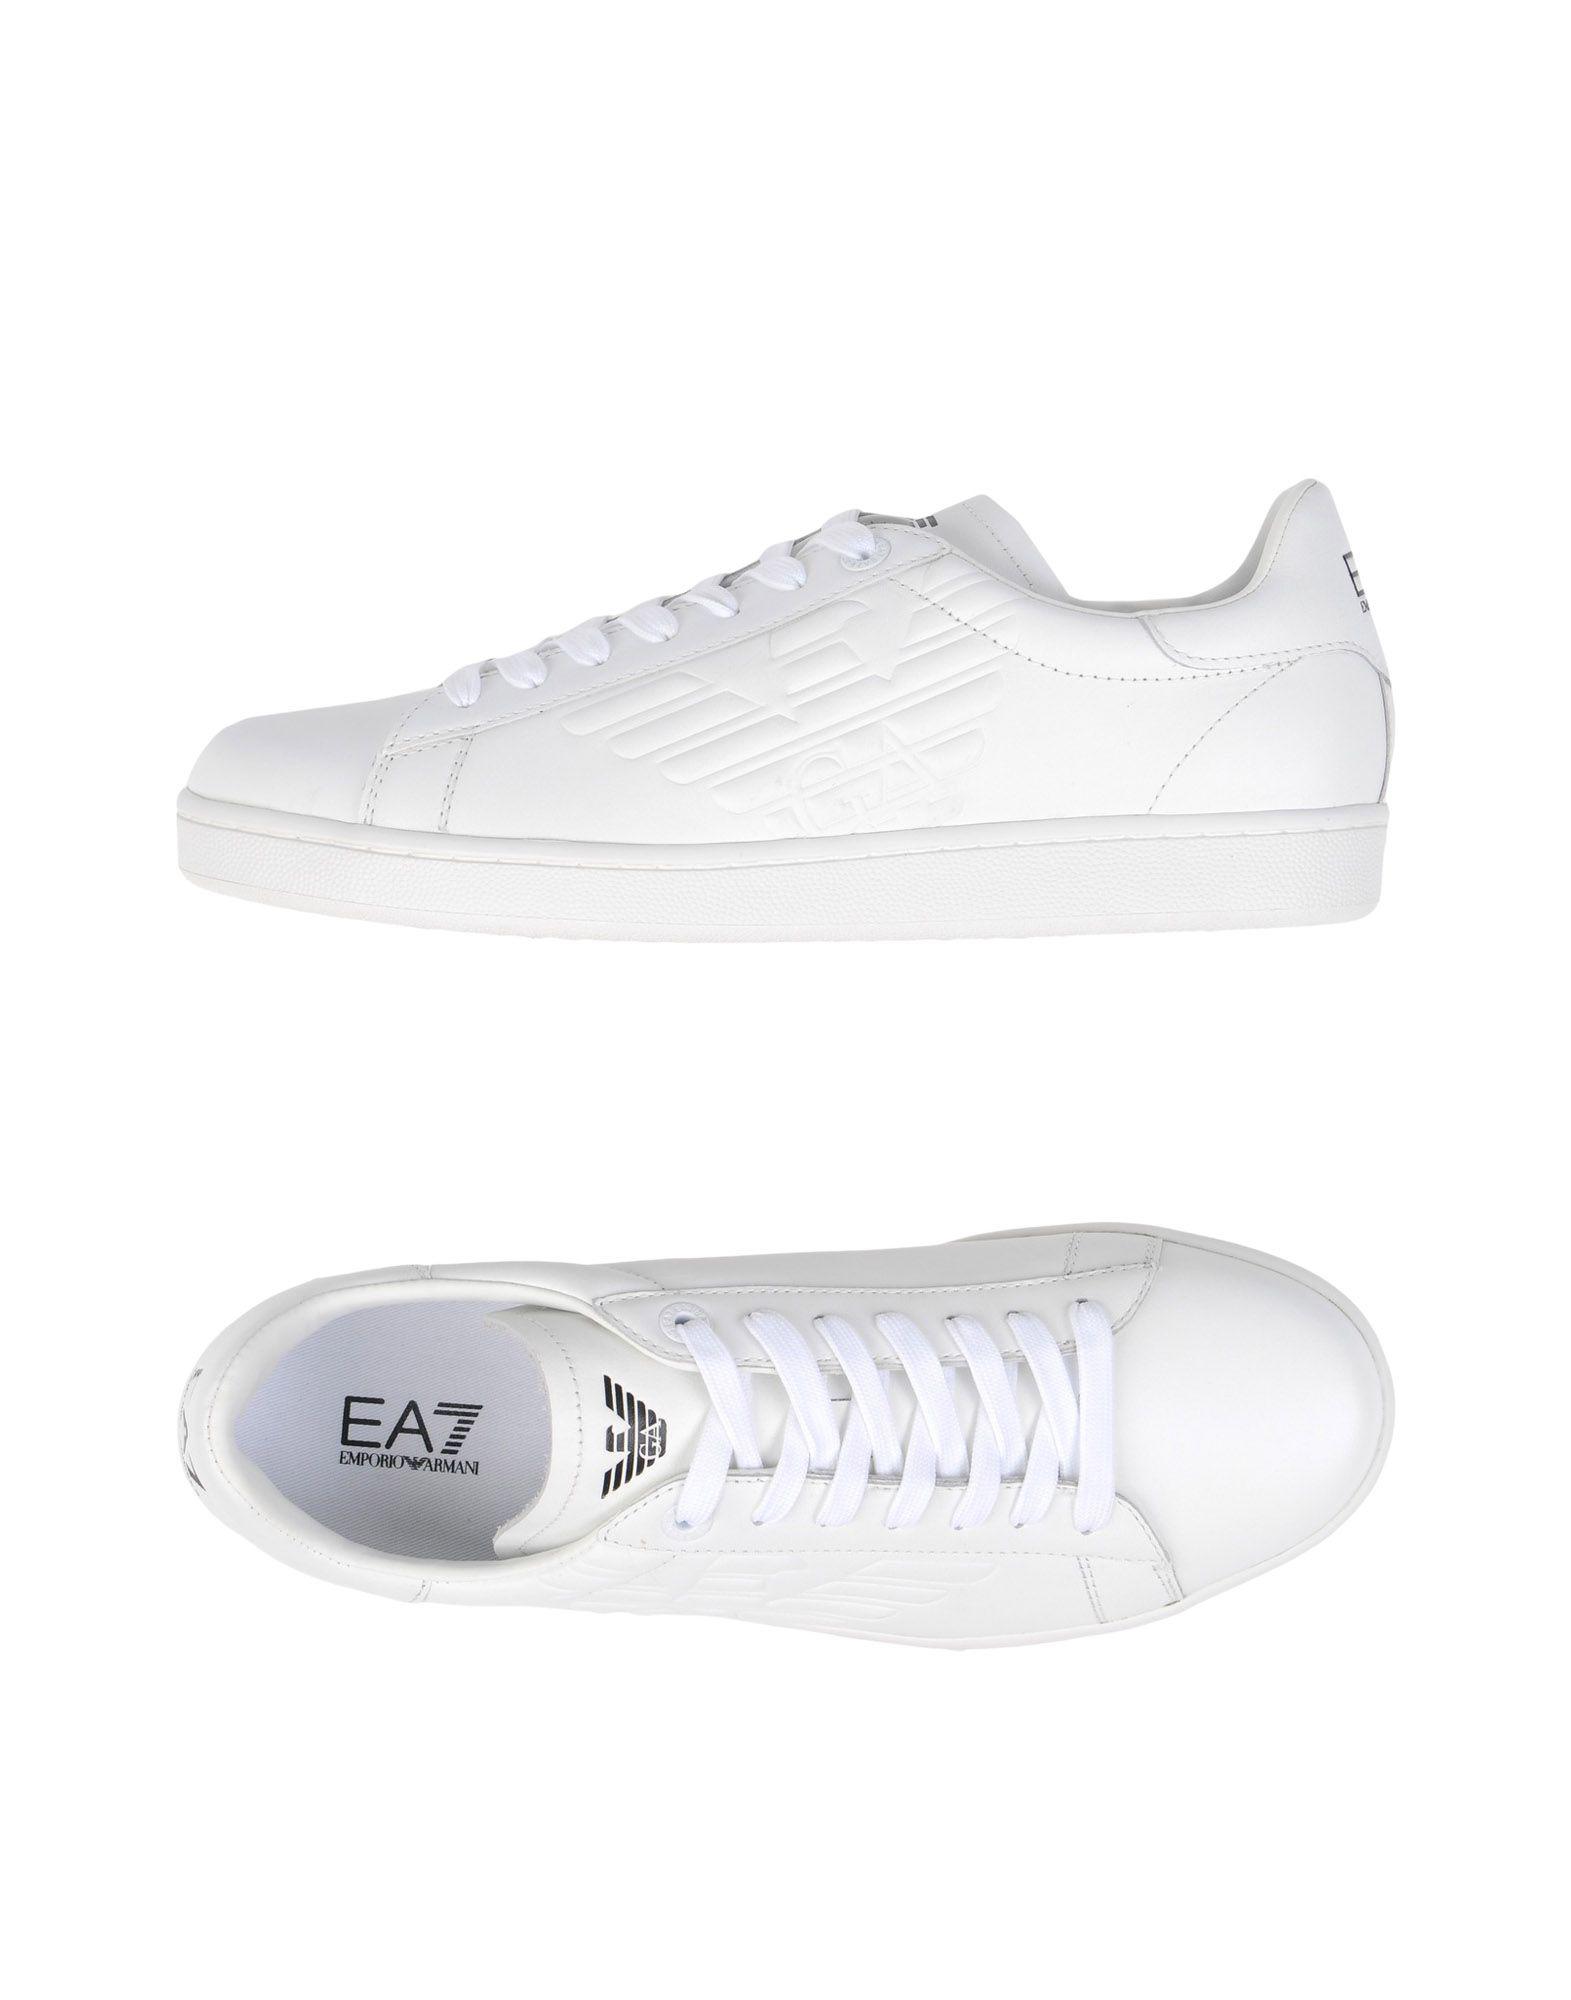 EA7 Leather Low-tops & Sneakers in White for Men - Lyst